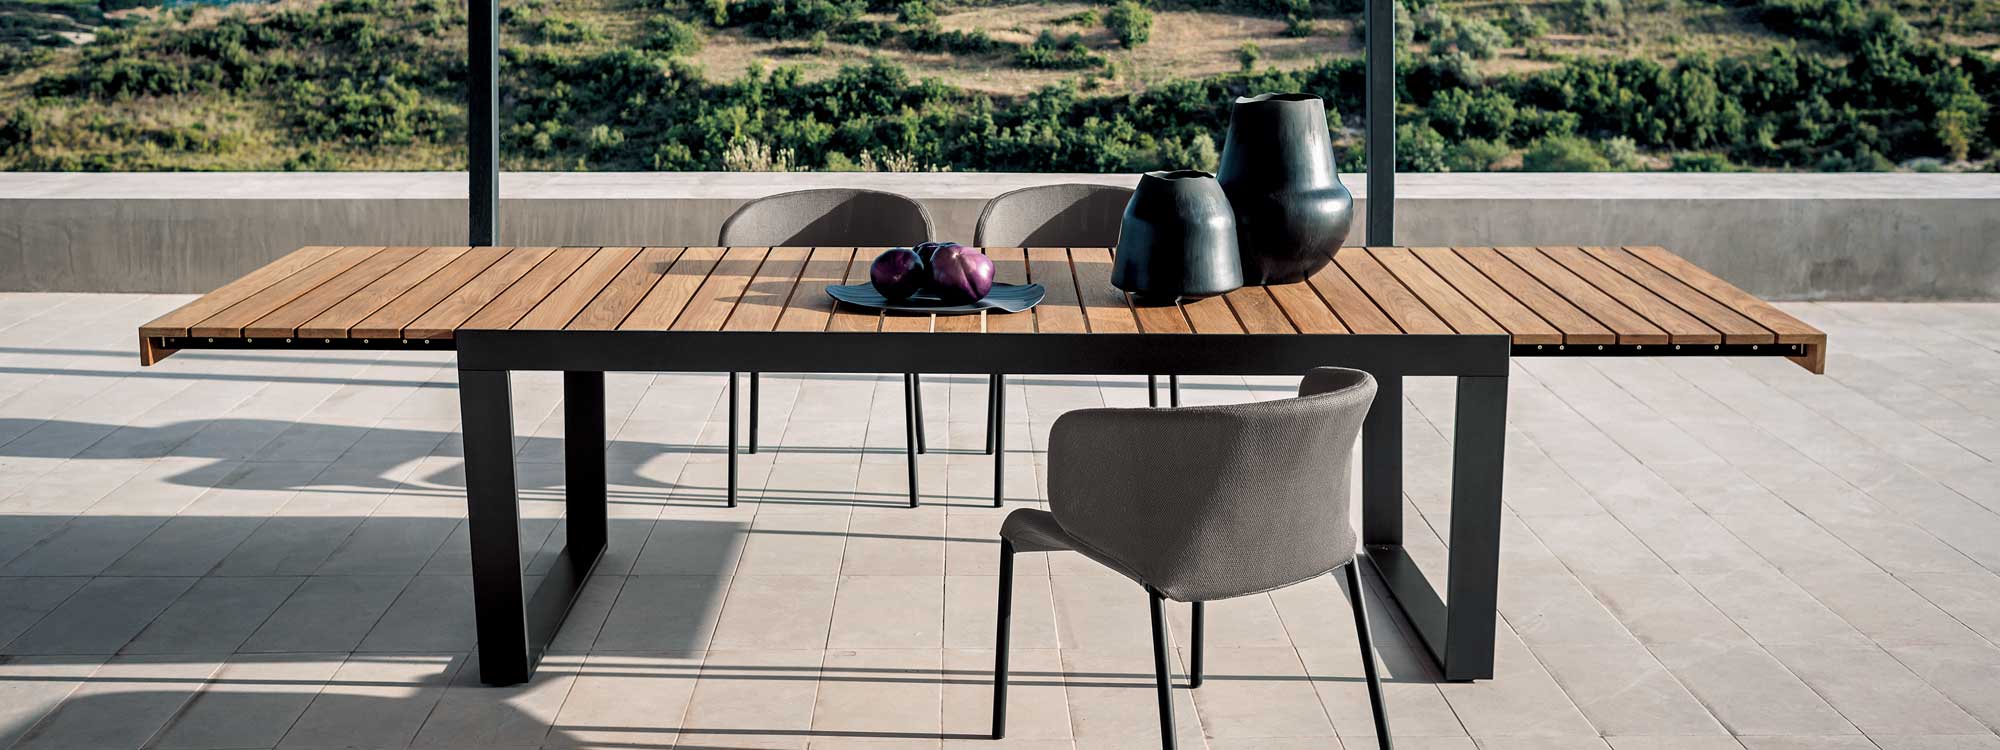 Image of RODA Spinnaker 12 seat extending garden table with Double chairs, shown on sleek terrace with countryside in the background